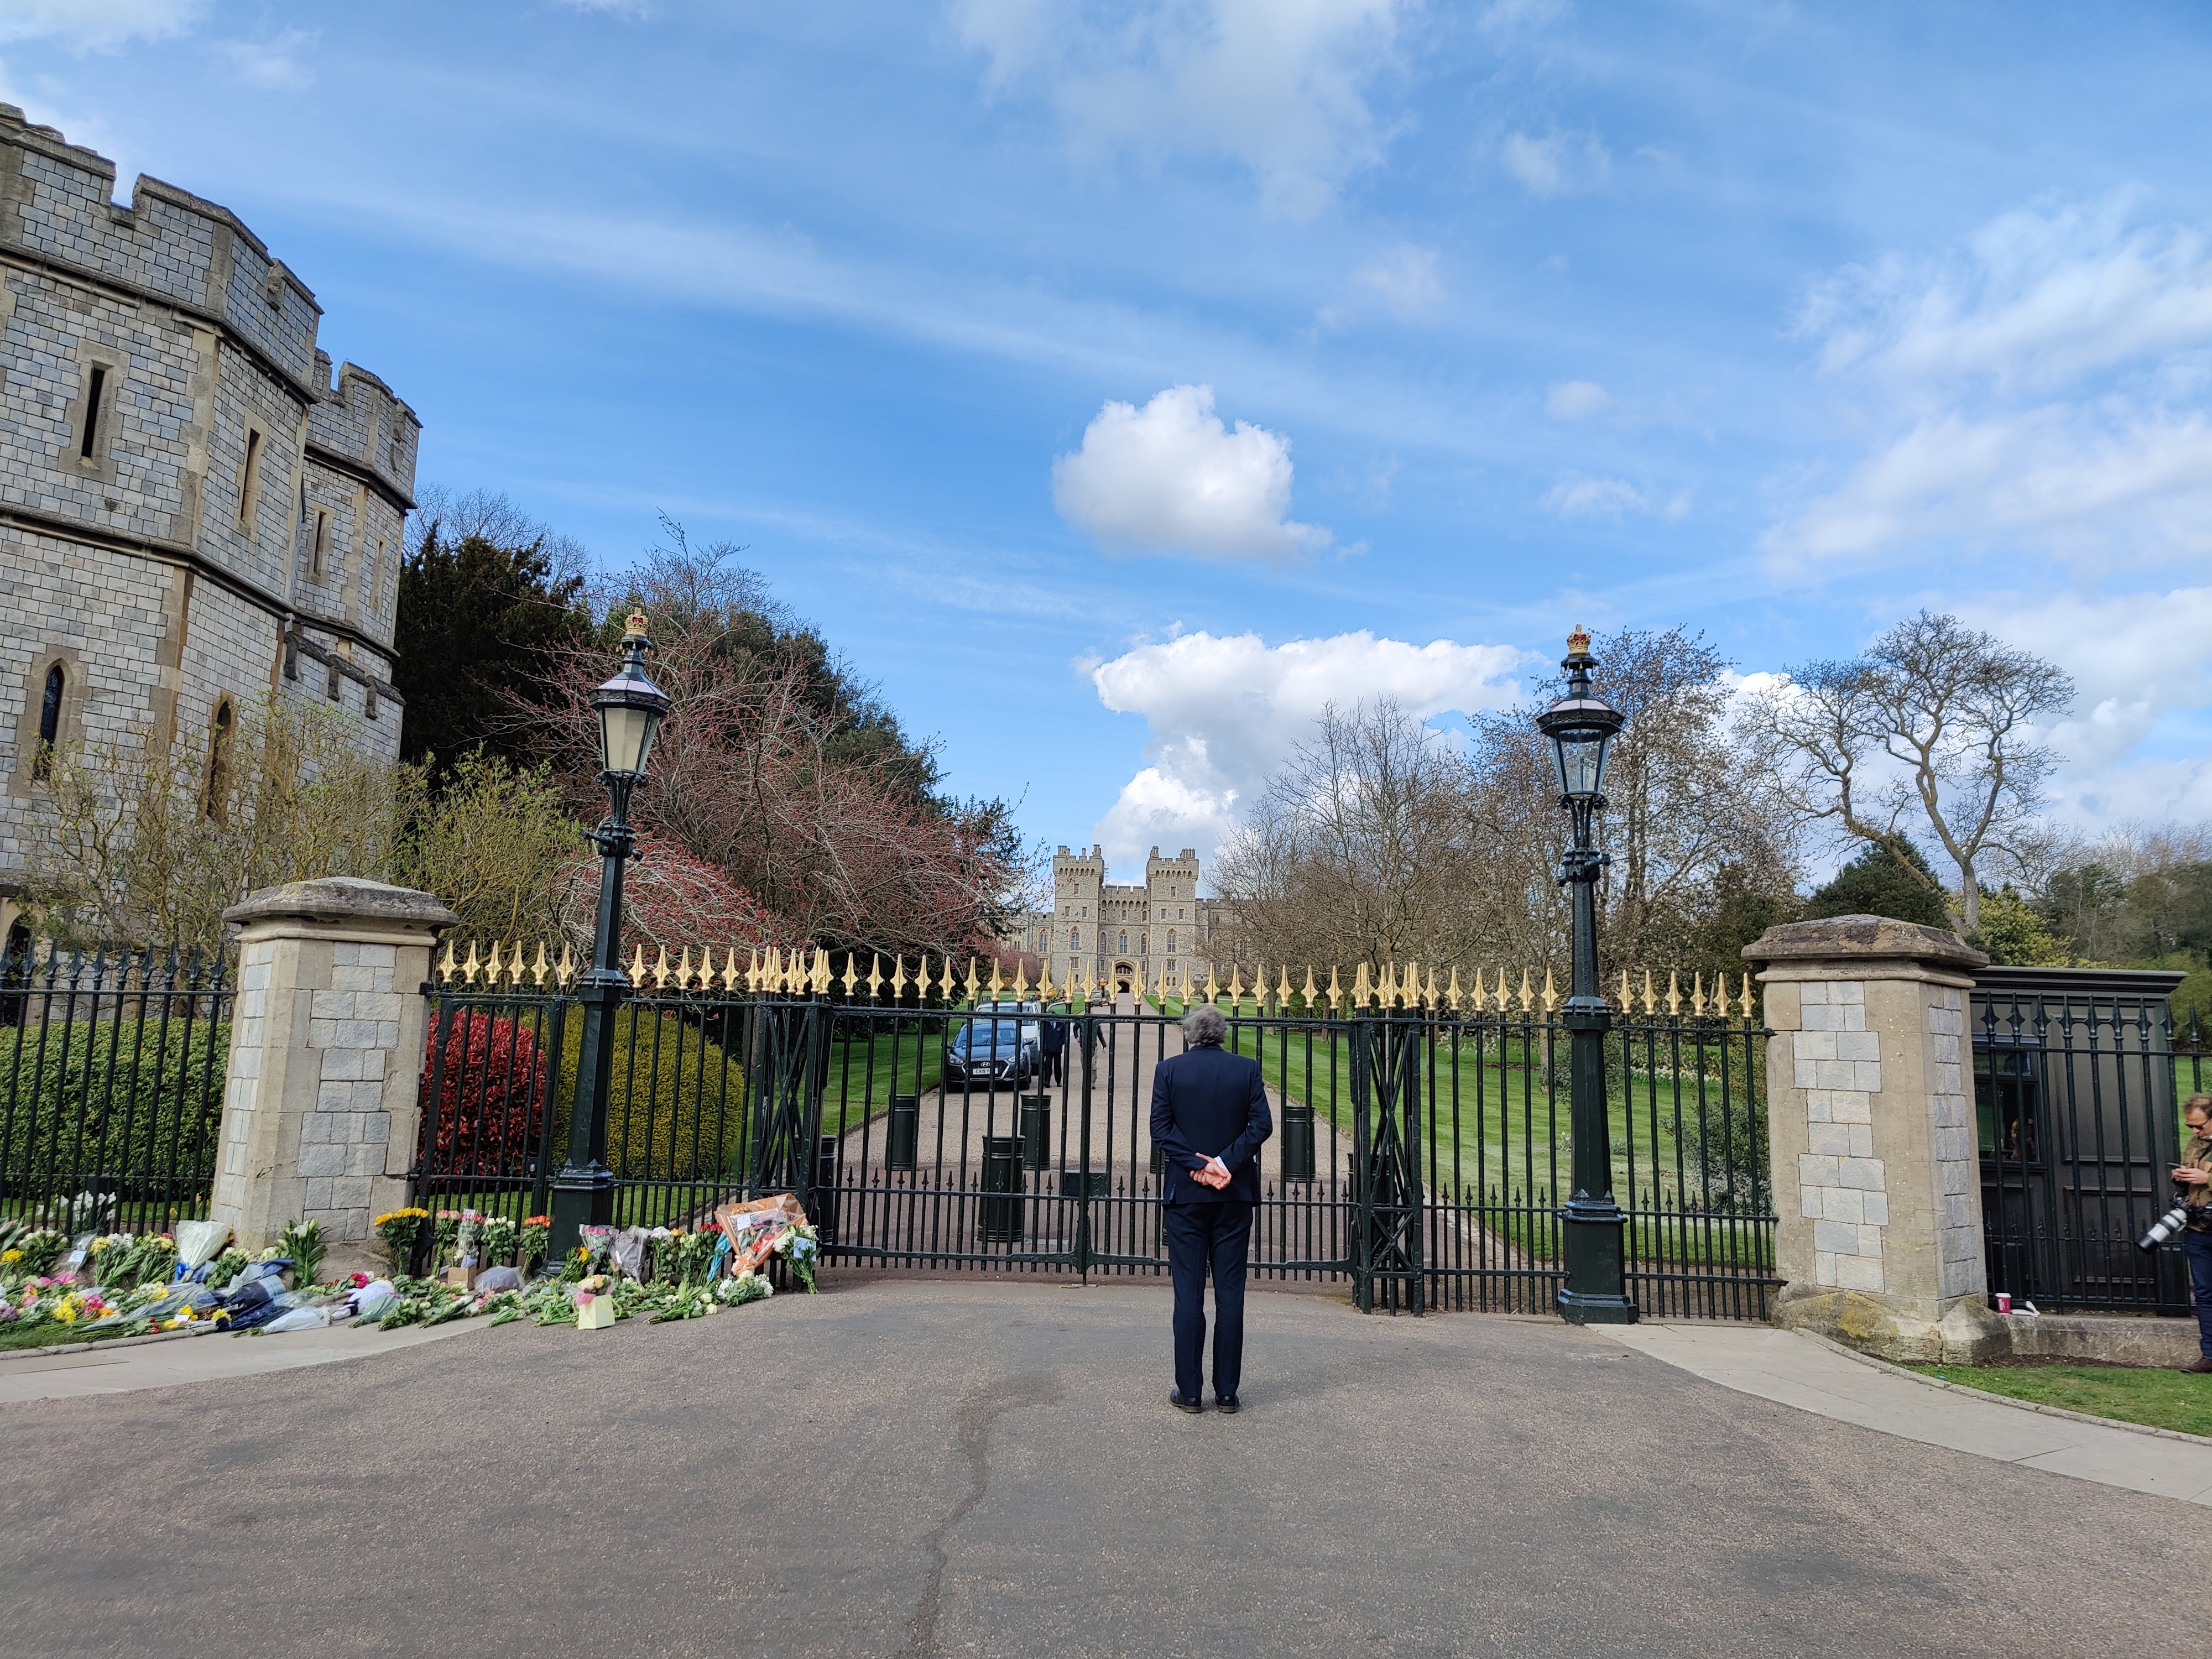 A man stands in front of the gate to Windsor Castle to pay his respects to Prince Philip